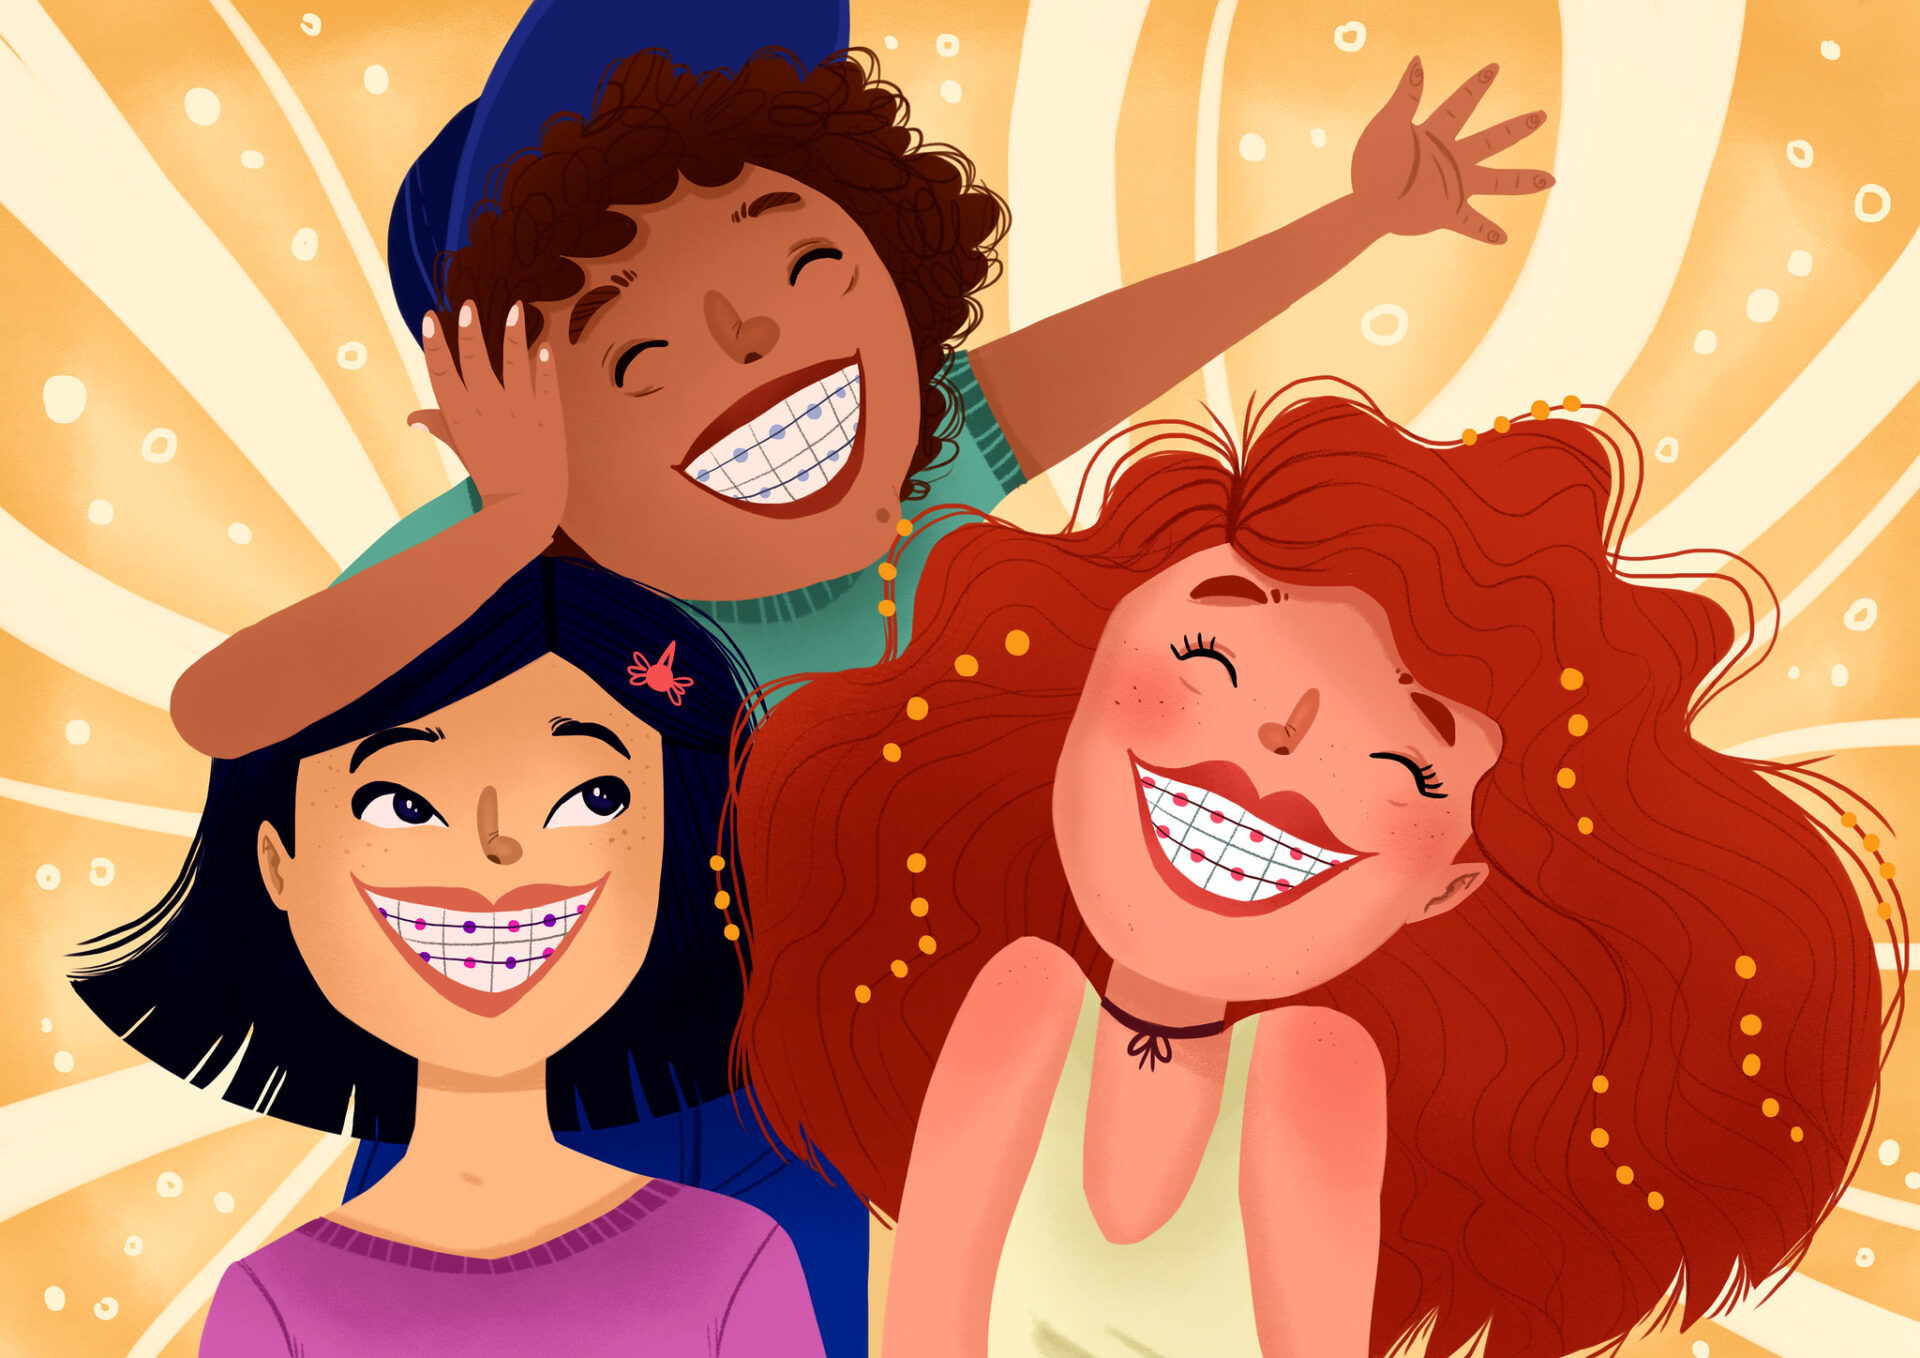 Illustration of 3 young kids smiling with braces